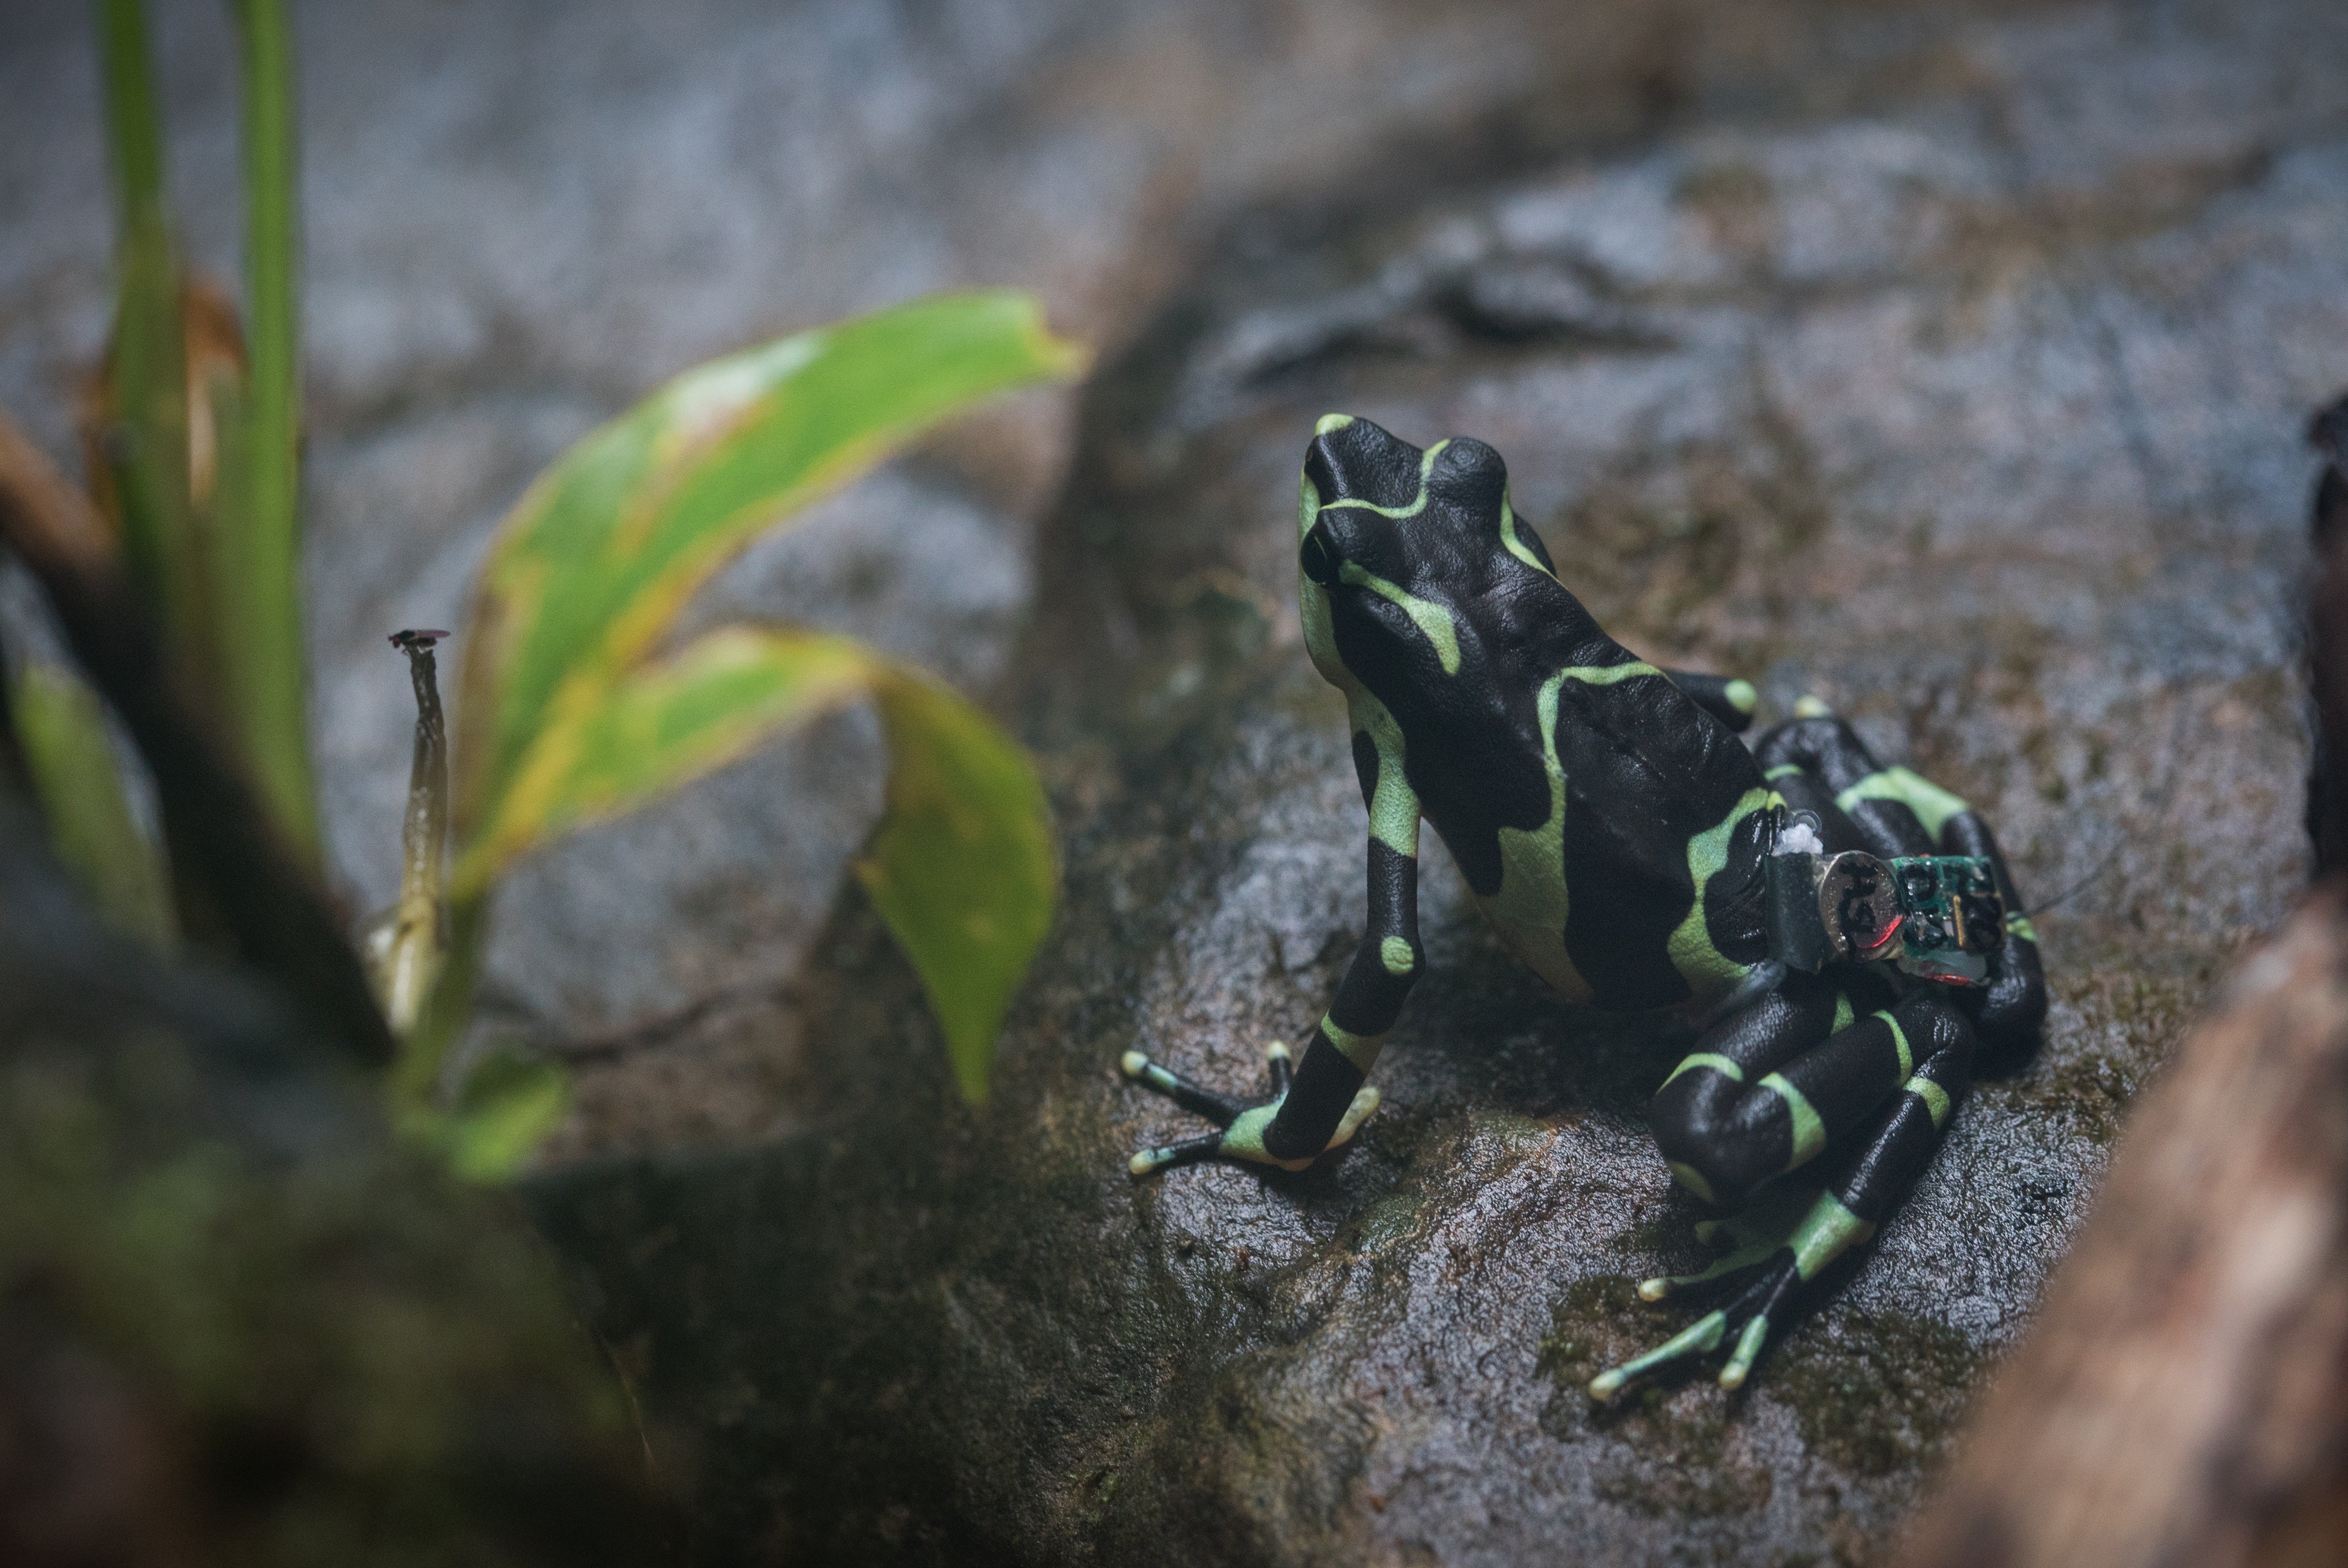 A green and black limosa harlequin frog with a satellite tracking tag on its back